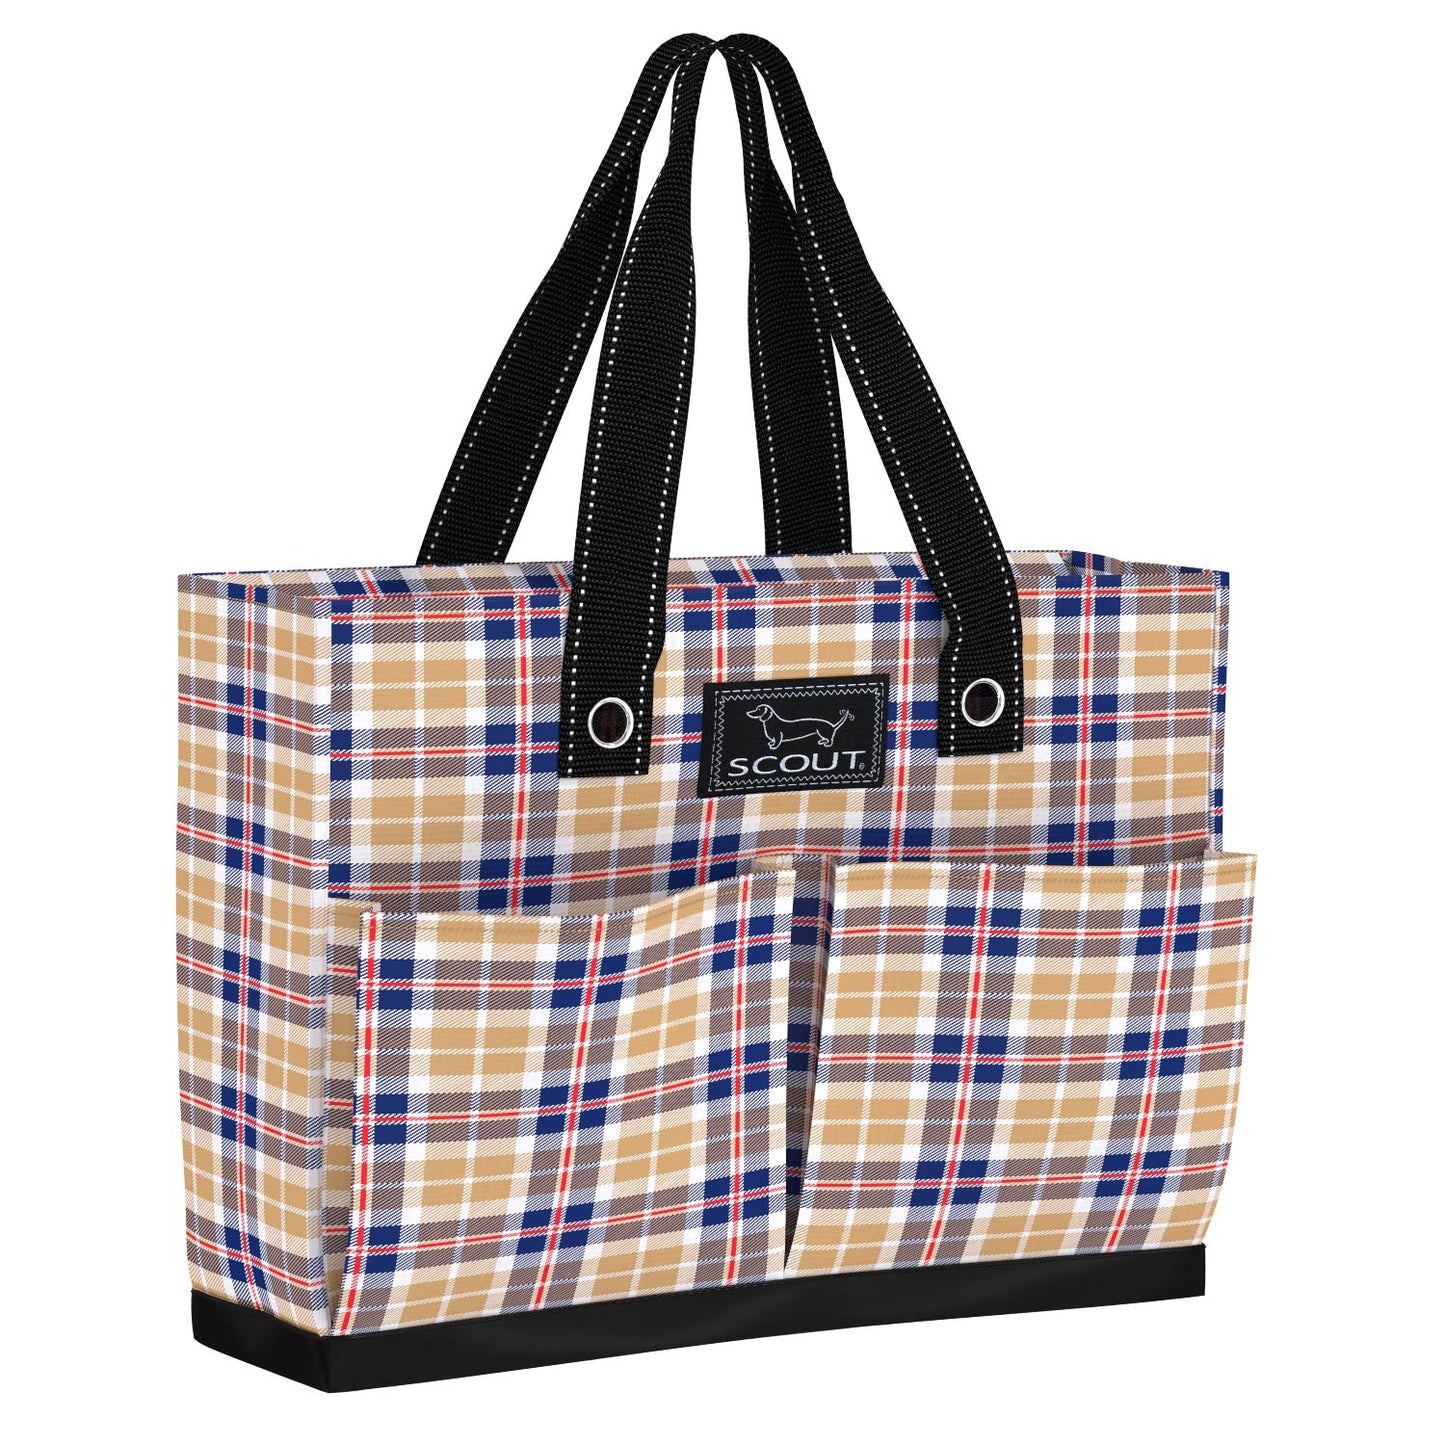 Summer Uptown Girl (tote) by Scout Bags